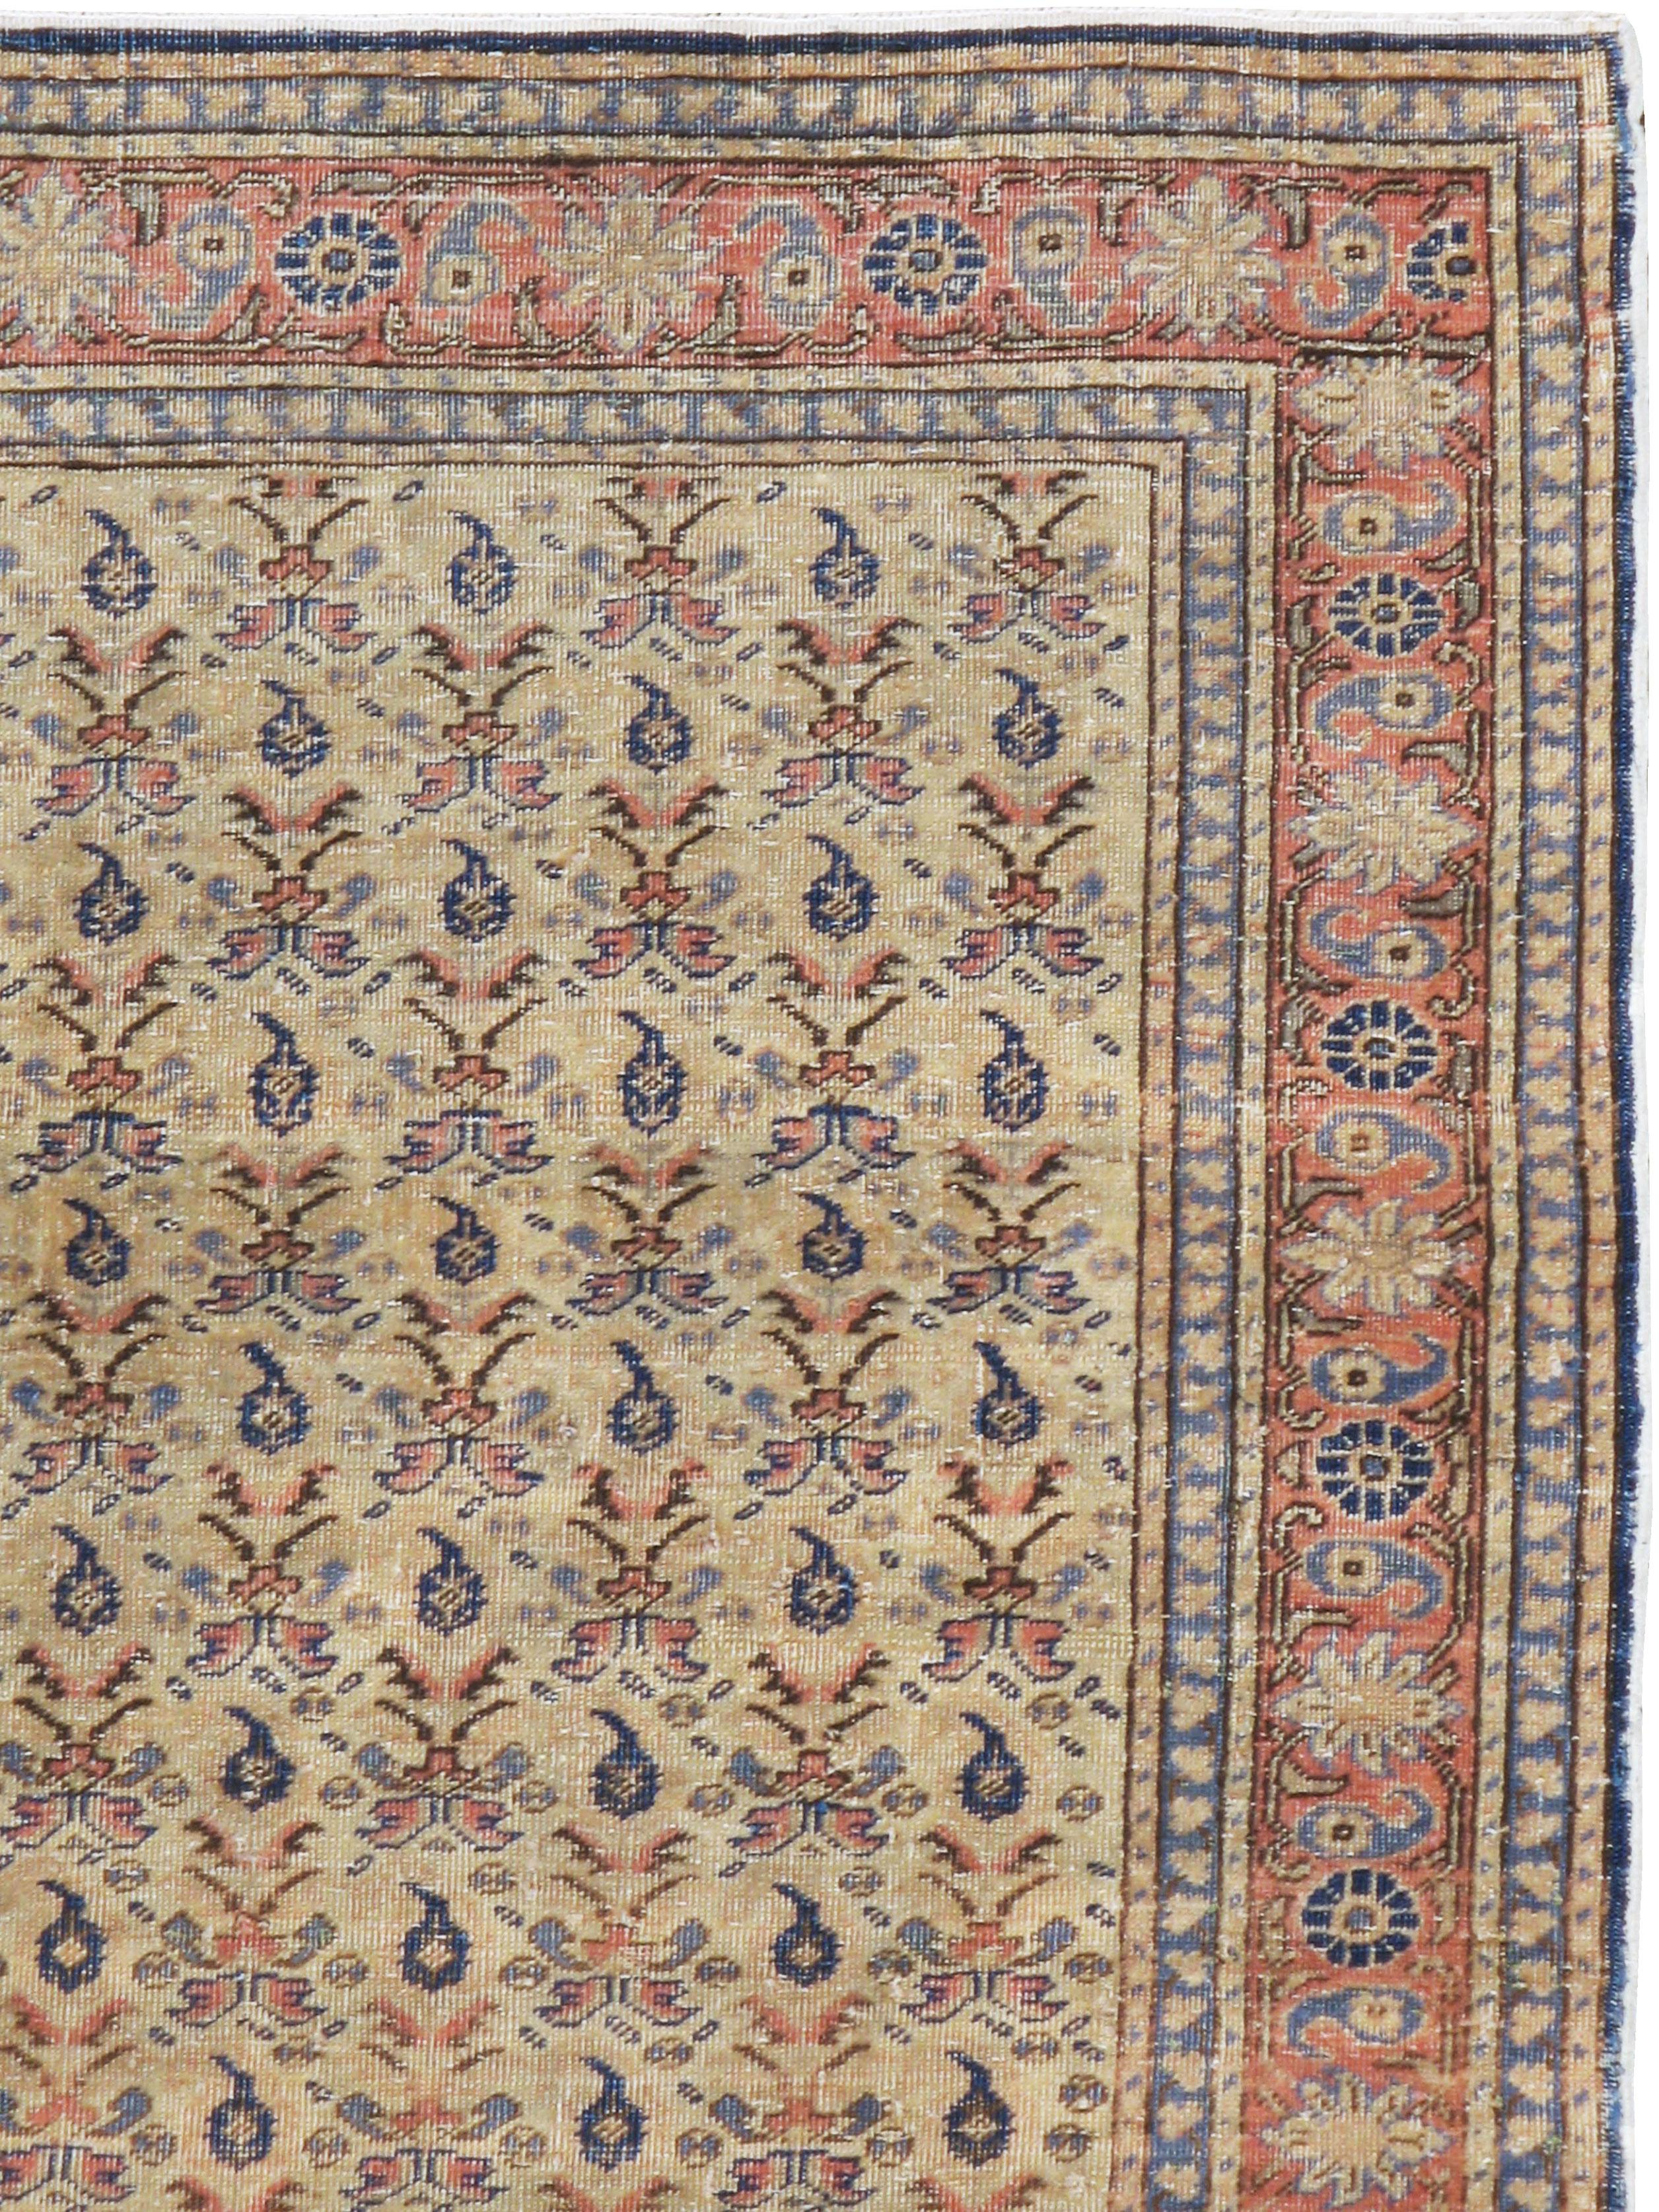 A vintage Turkish Sivas rug from the mid-20th century.

Measures: 4' x 5' 11